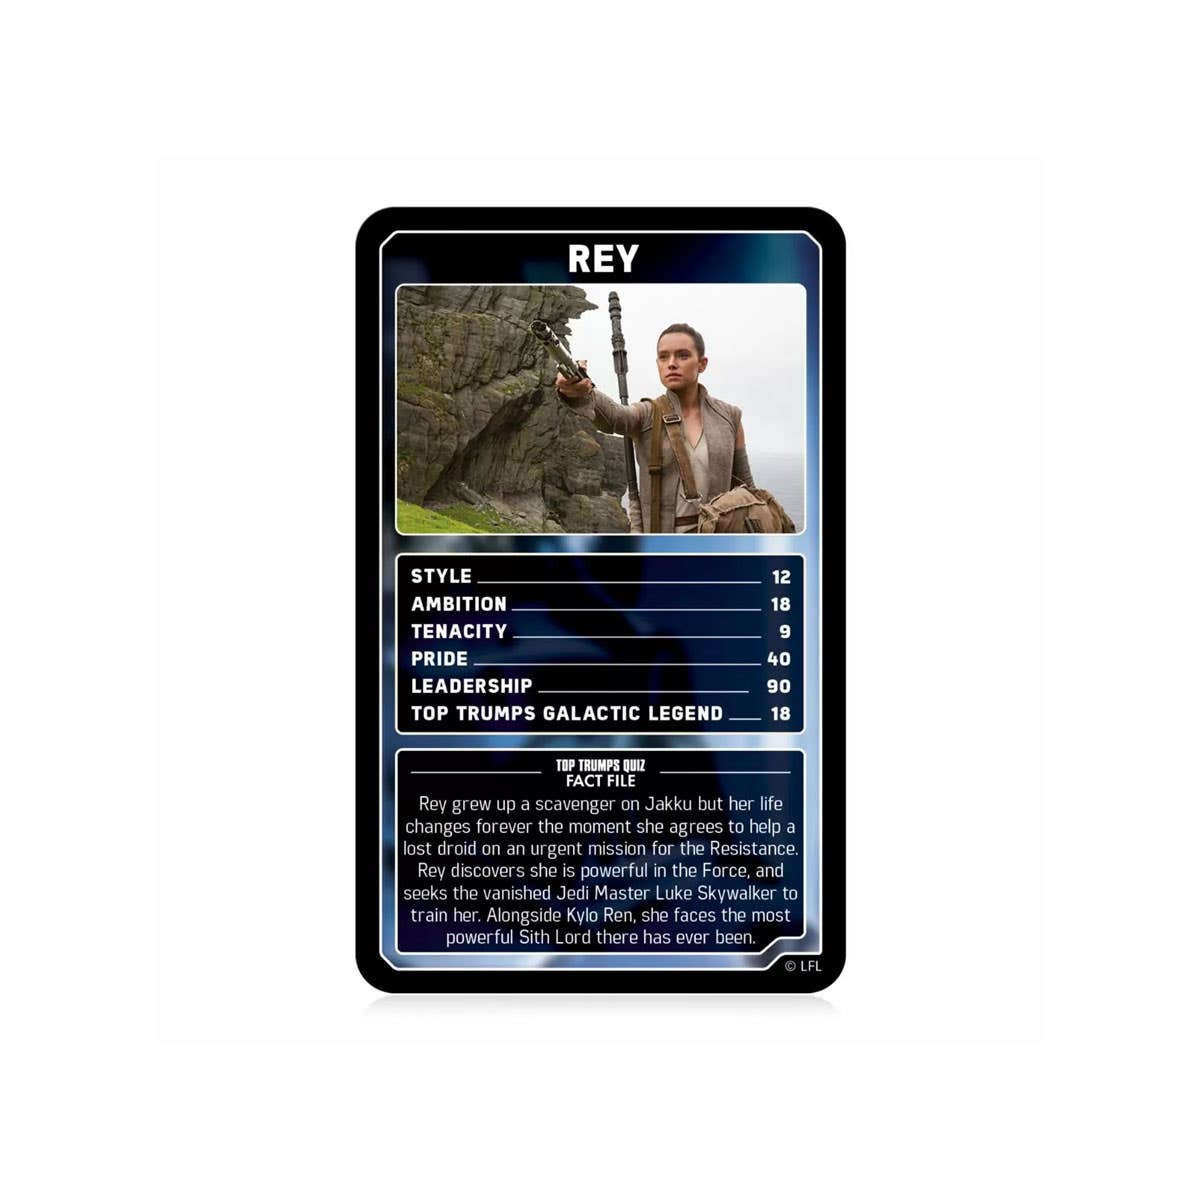 Star Wars Episodes 1-9 Top Trumps Limited Edition Game